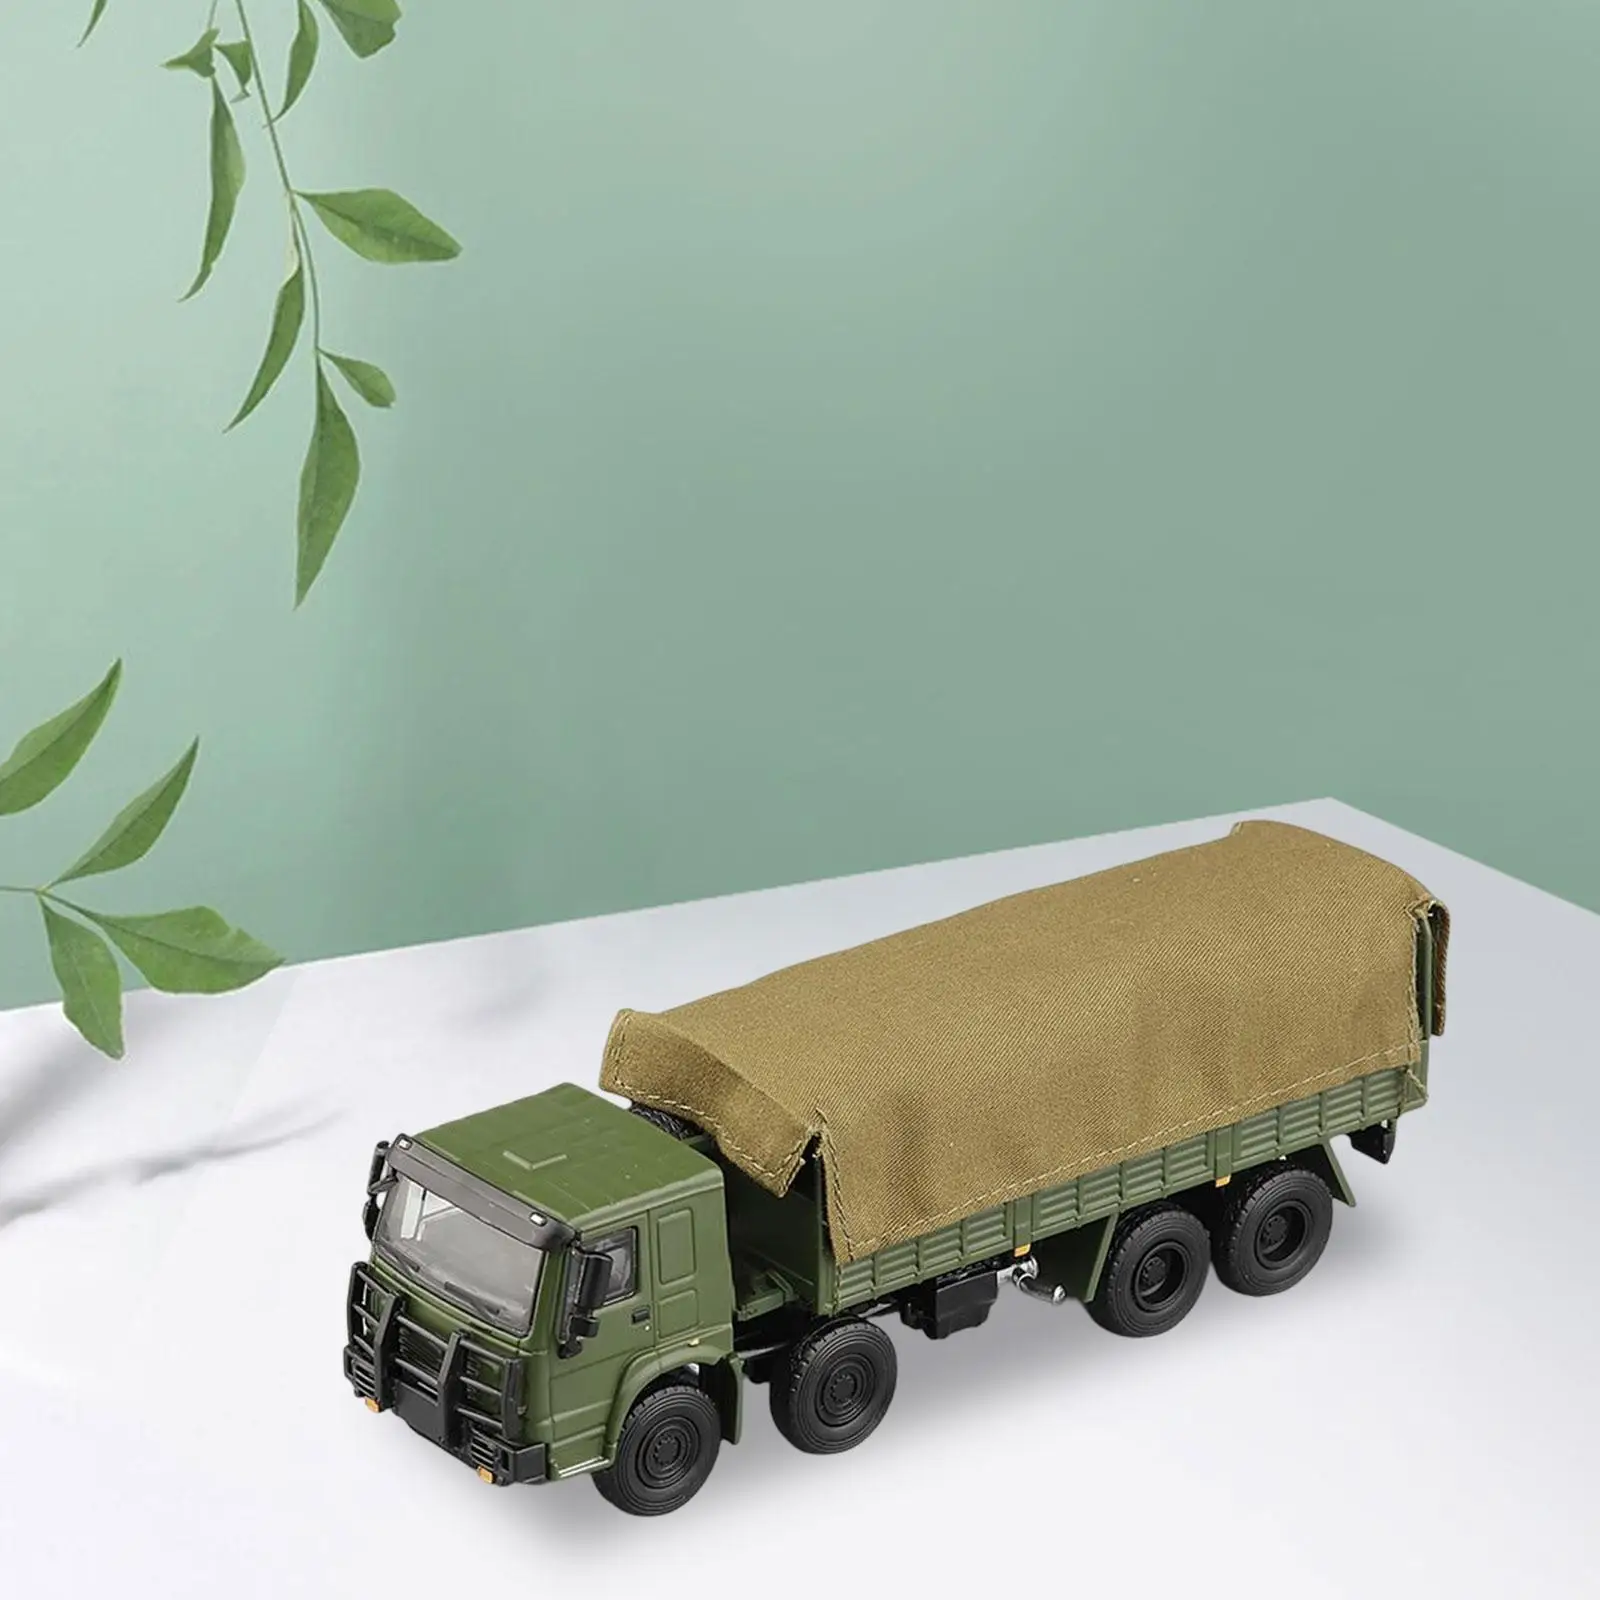 1/64 Transport Truck Diecast Toys Adults Gifts Desk Decoration Collection for Miniature Scene Photography Props Decoration